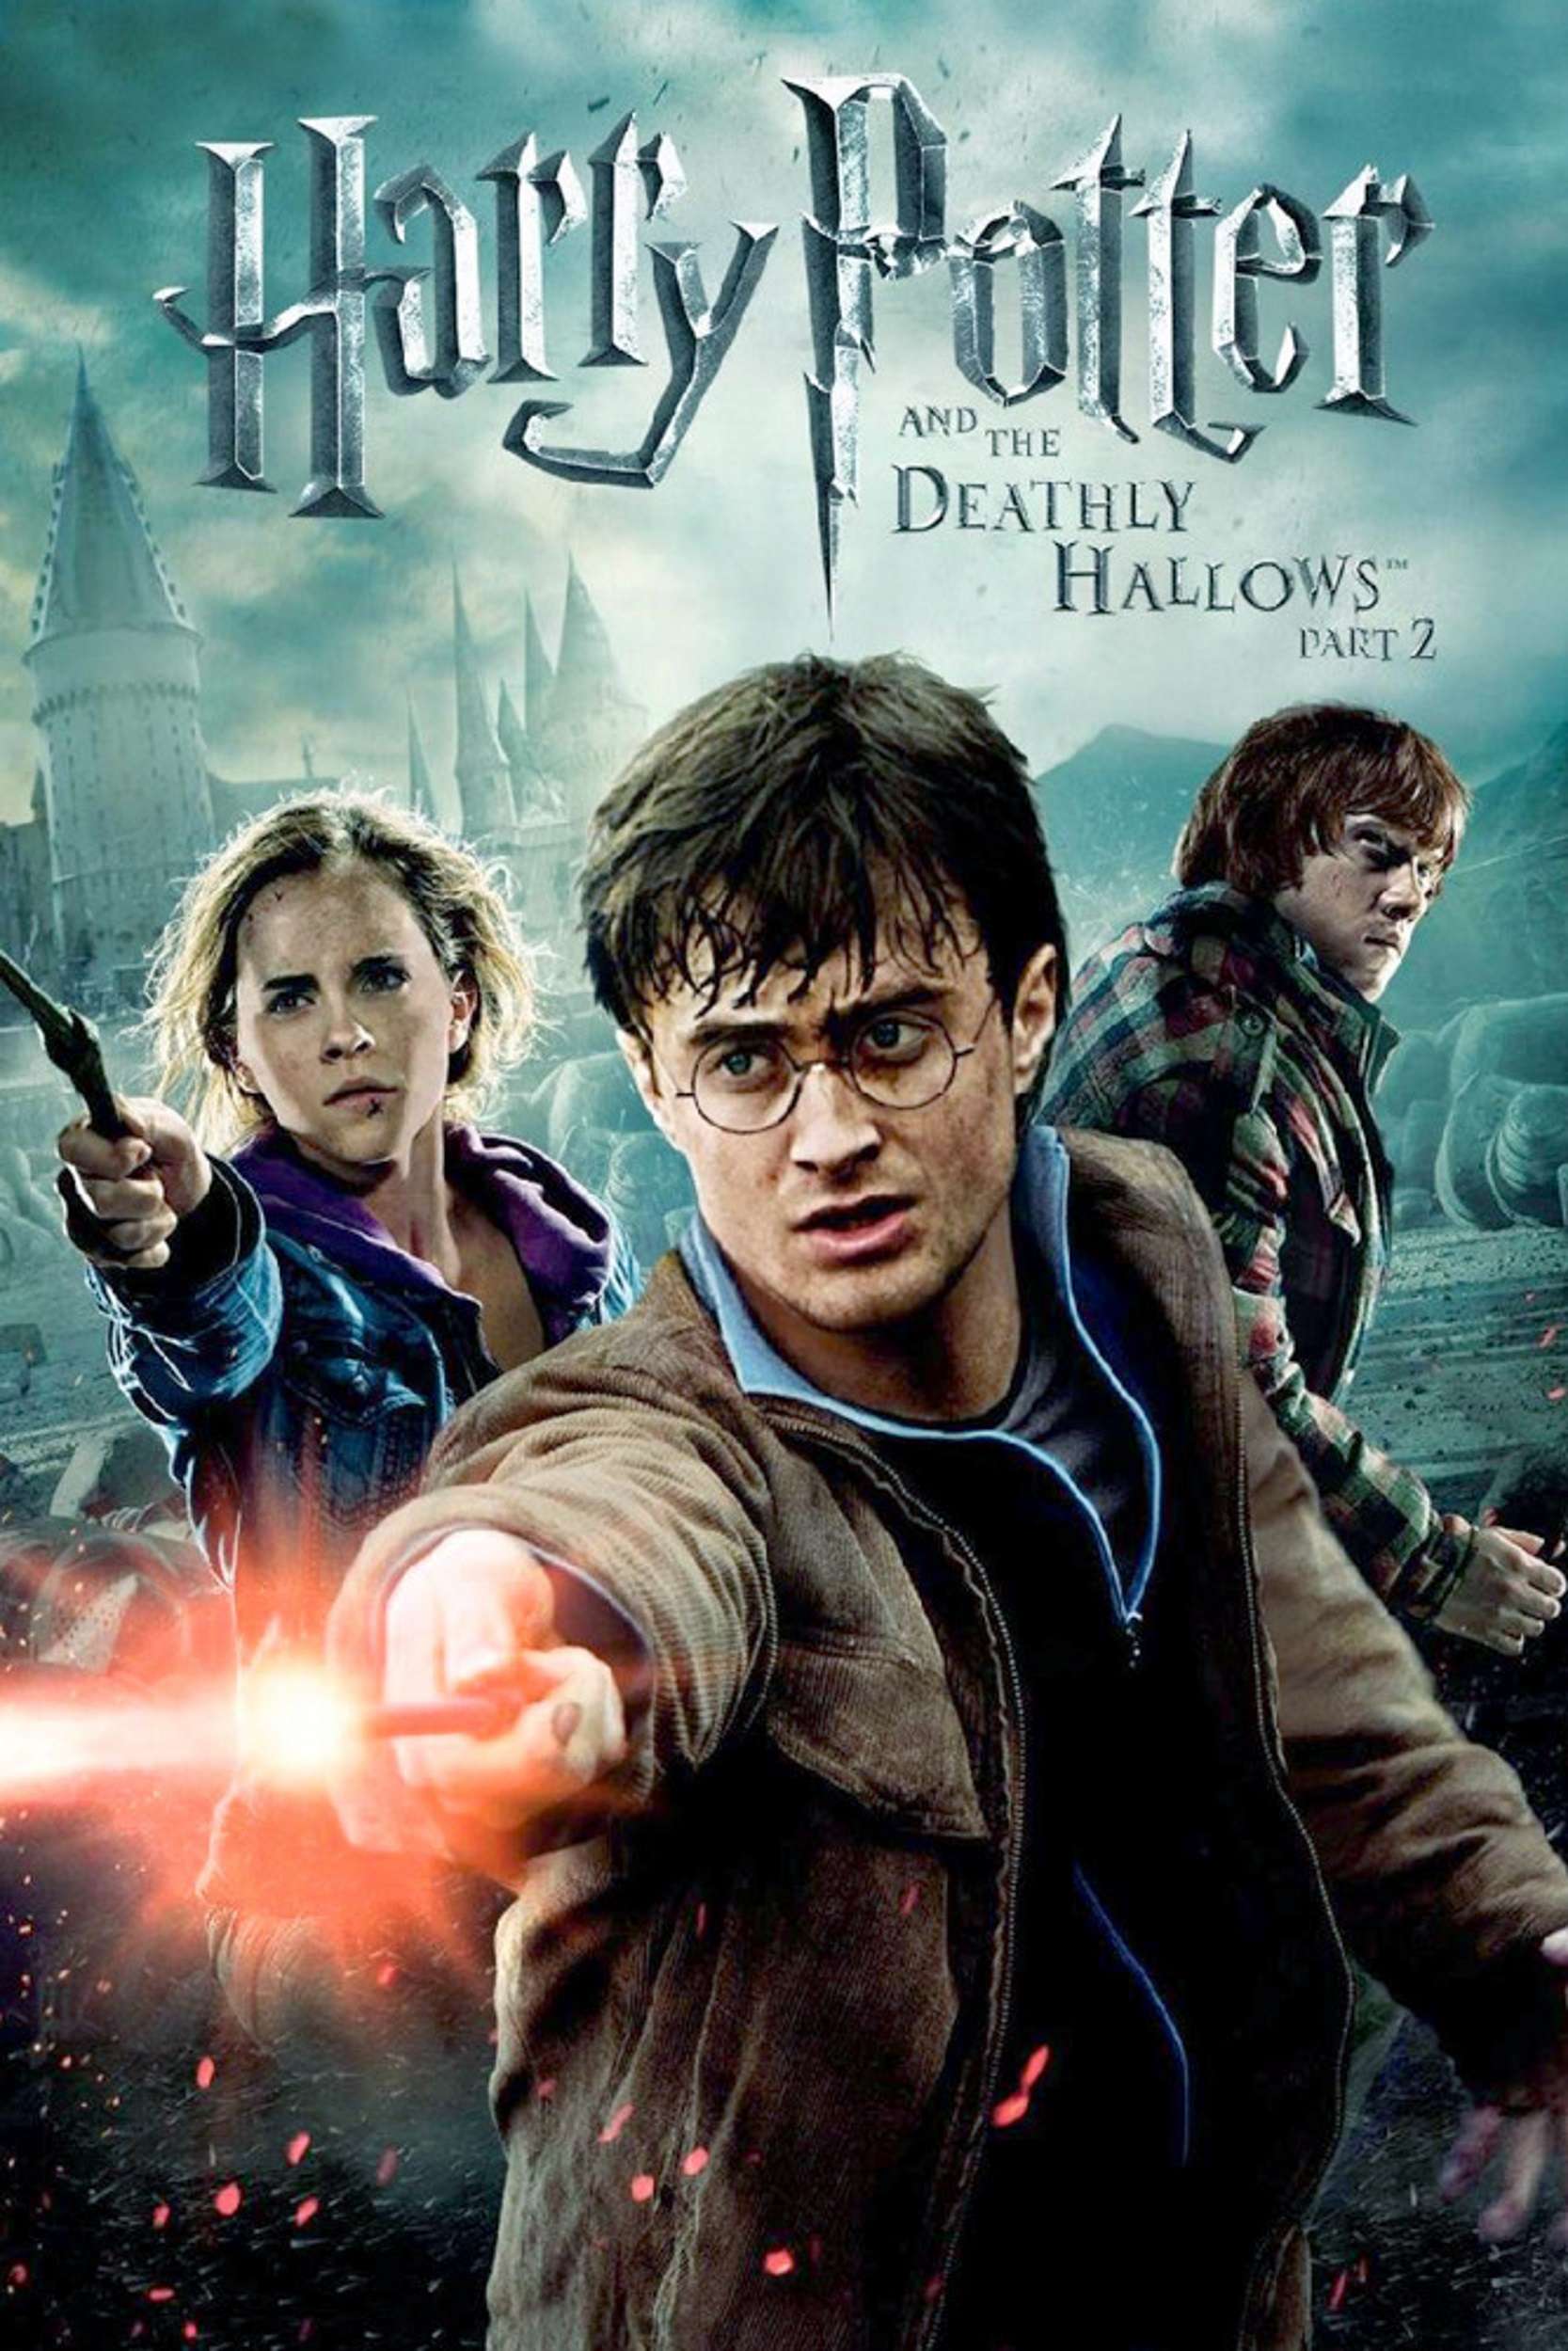 Harry Potter And The Deathly Hallows (Part